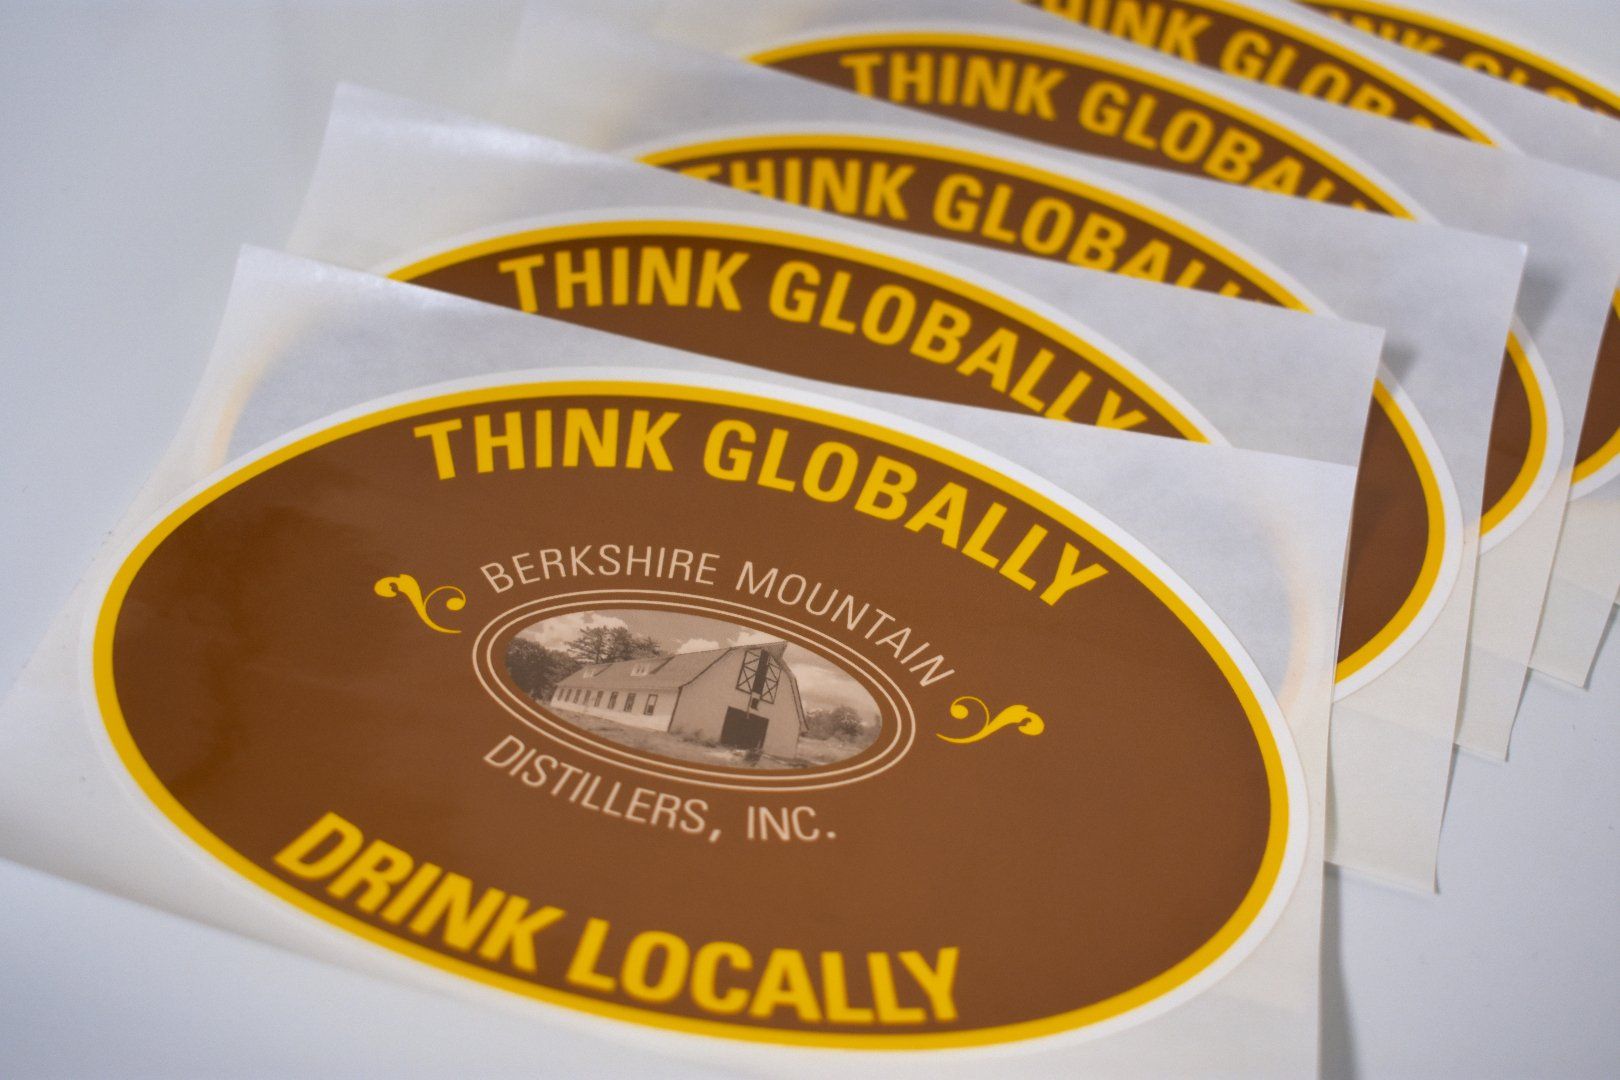 Berkshire Mountain Distillery decals fanned out on white background